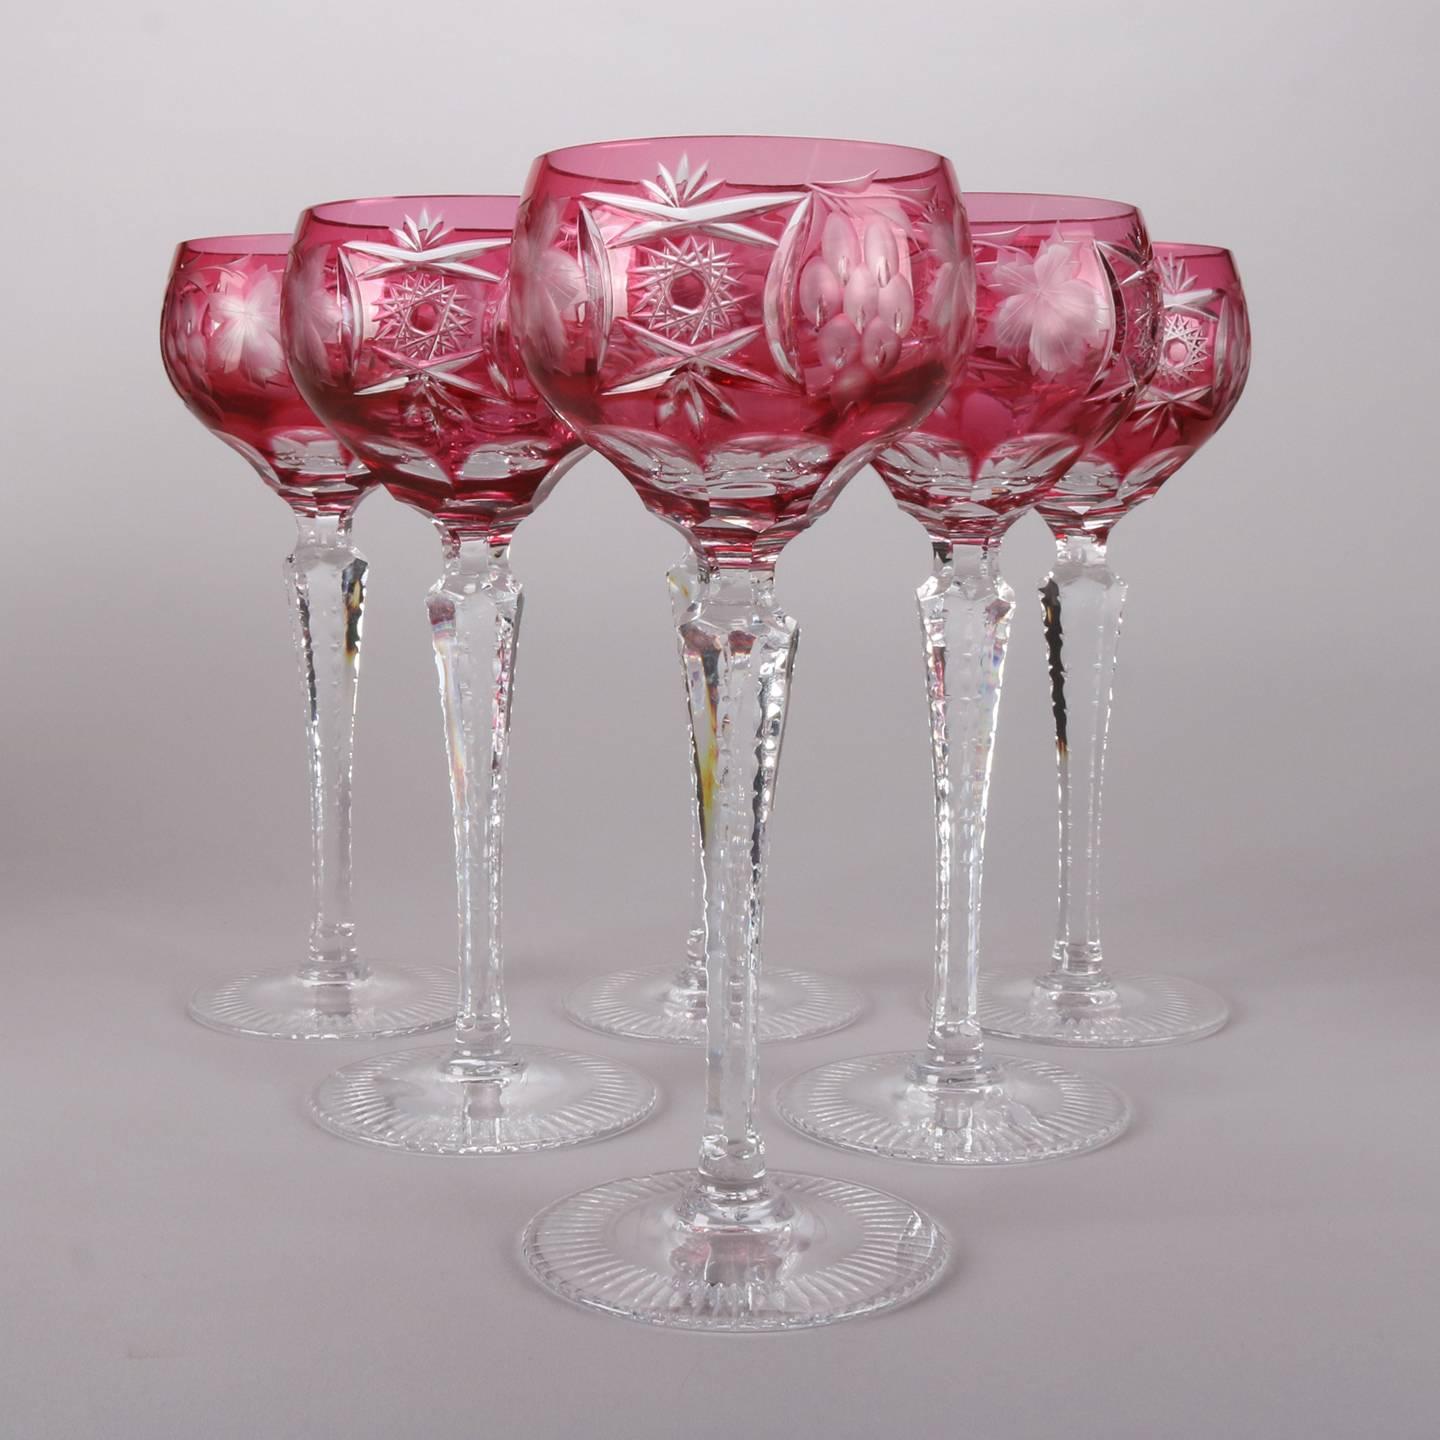 Antique 14-peice cranberry glass cut to clear liqueur set includes two decanters, six wine glasses and six cordial glasses, 19th century.
 